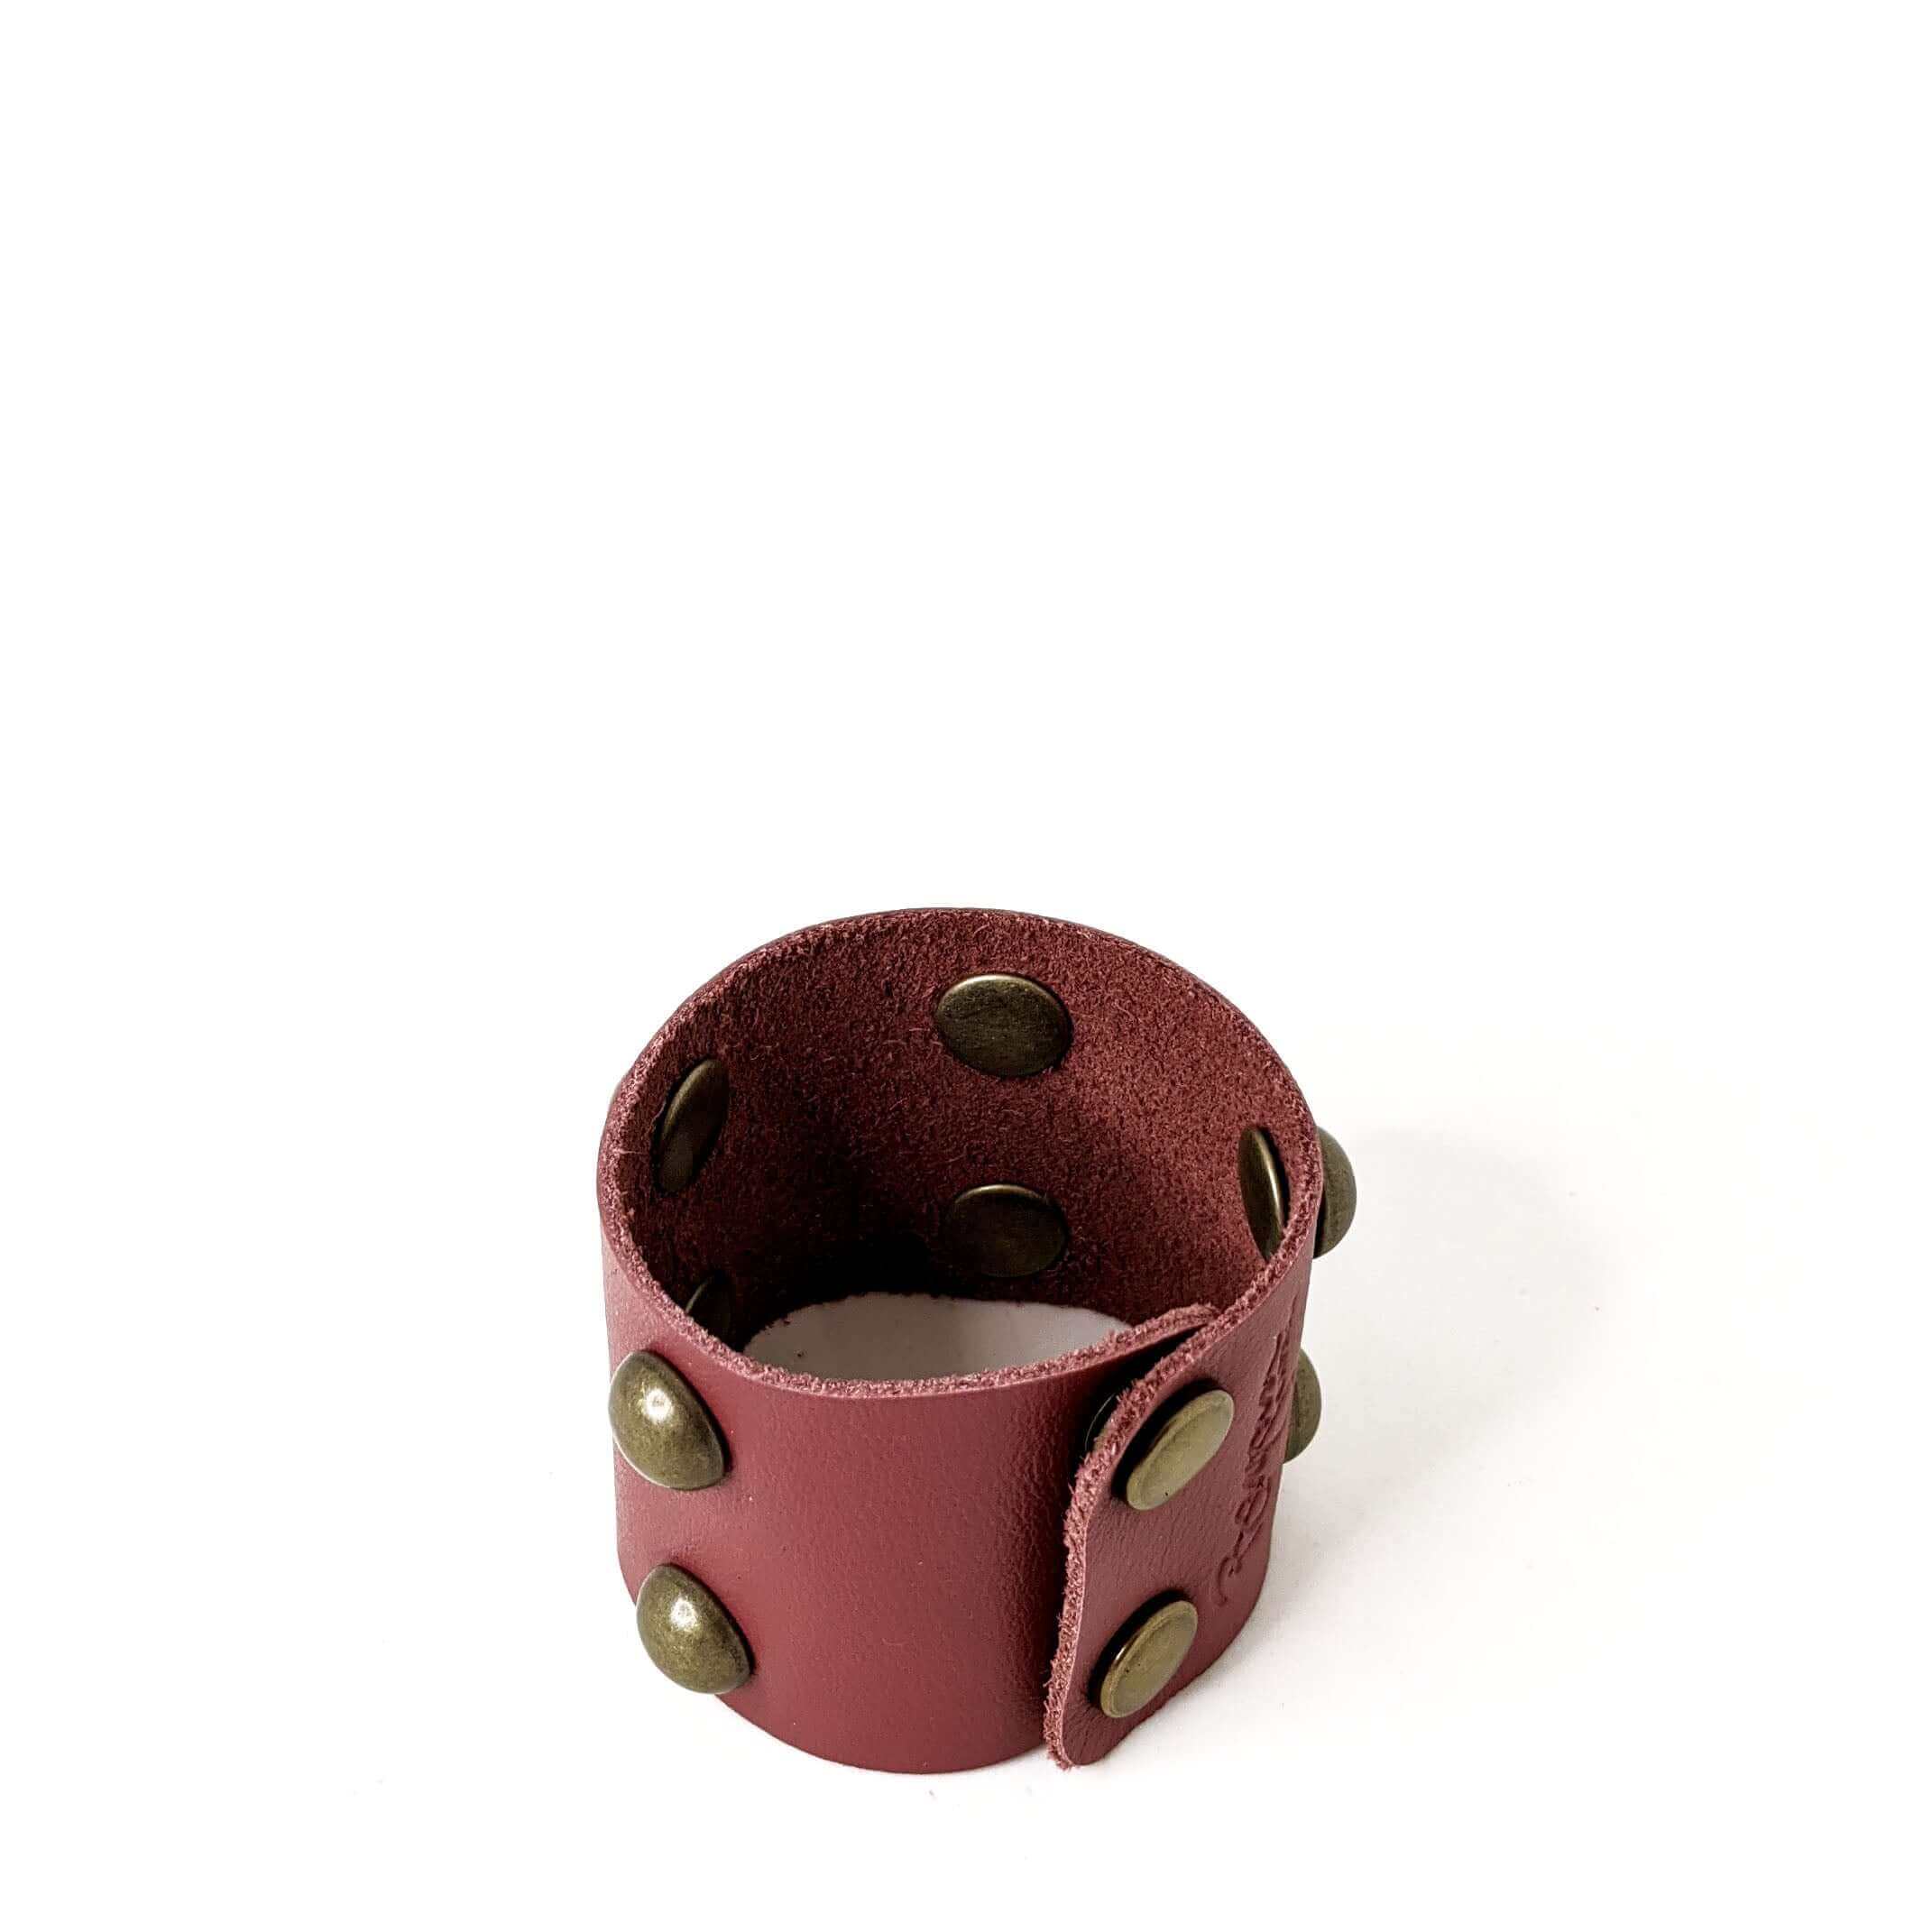 Lexy Studded Bracelet | Brynn Capella, Leather Goods Made in the USA